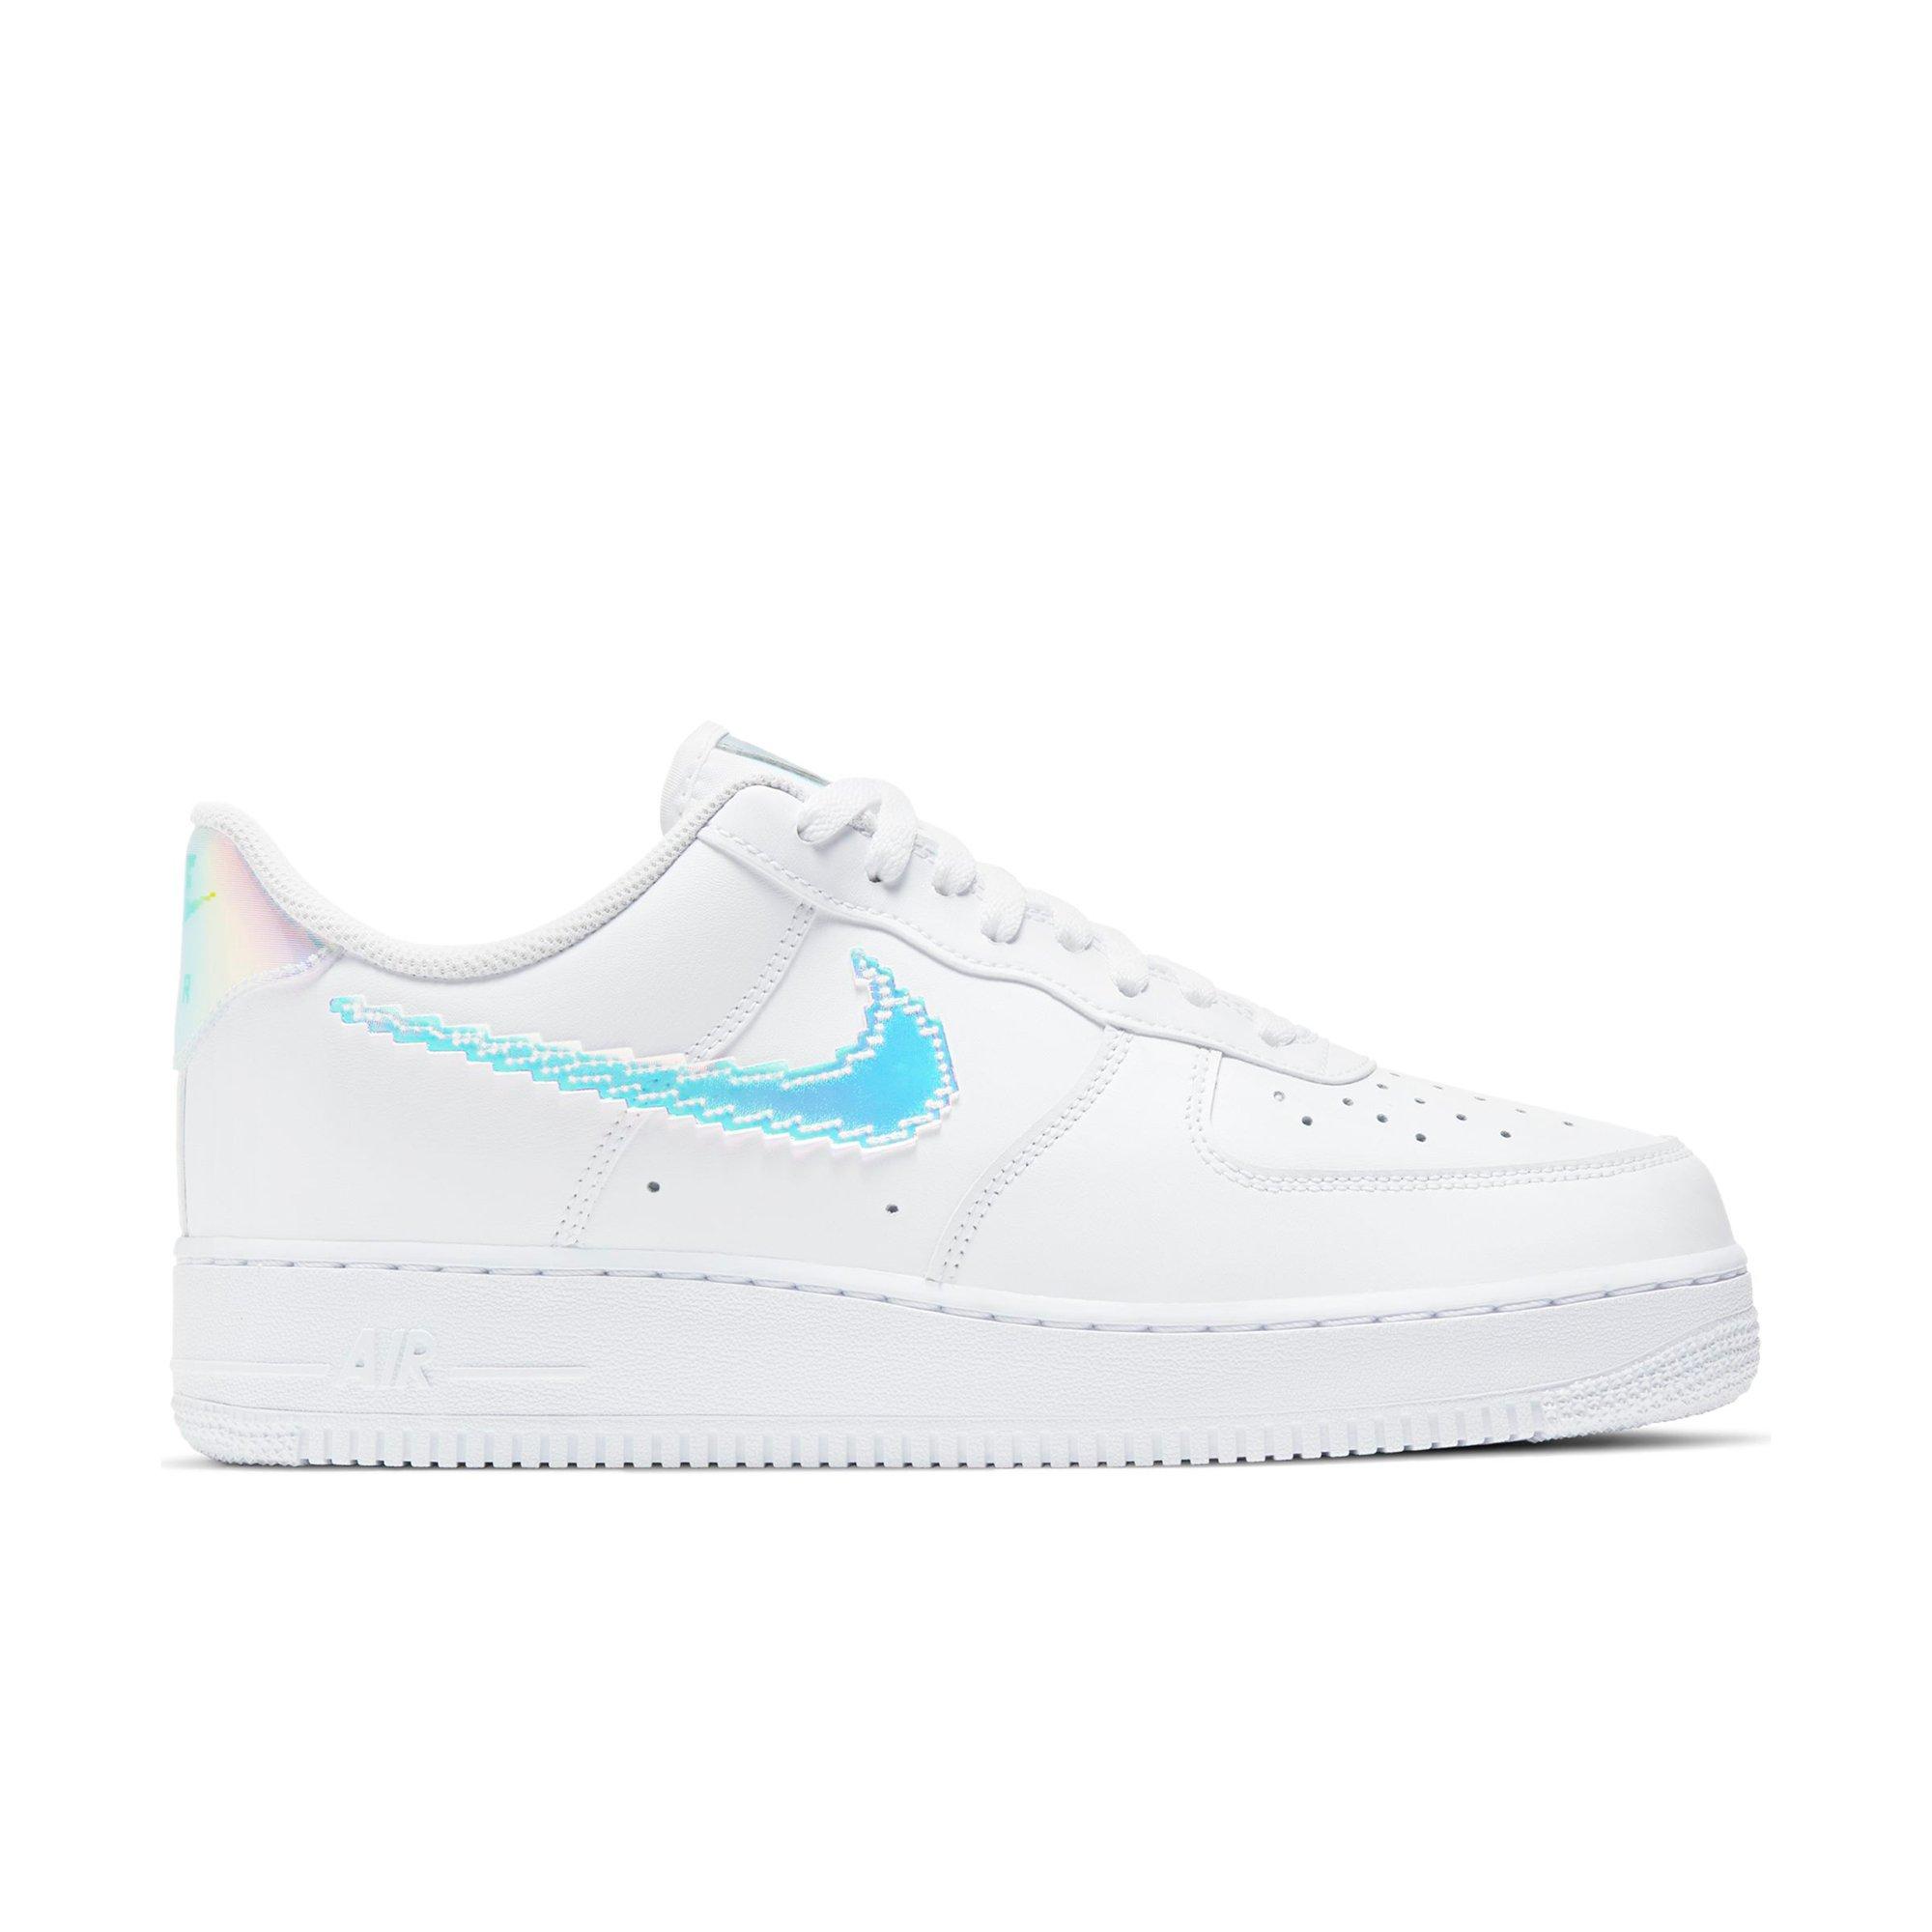 Nike Air Force 1 '07 LV8 Reflective Swoosh (us_Footwear_Size_System, Adult,  Men, Numeric, Medium, Numeric_11) White